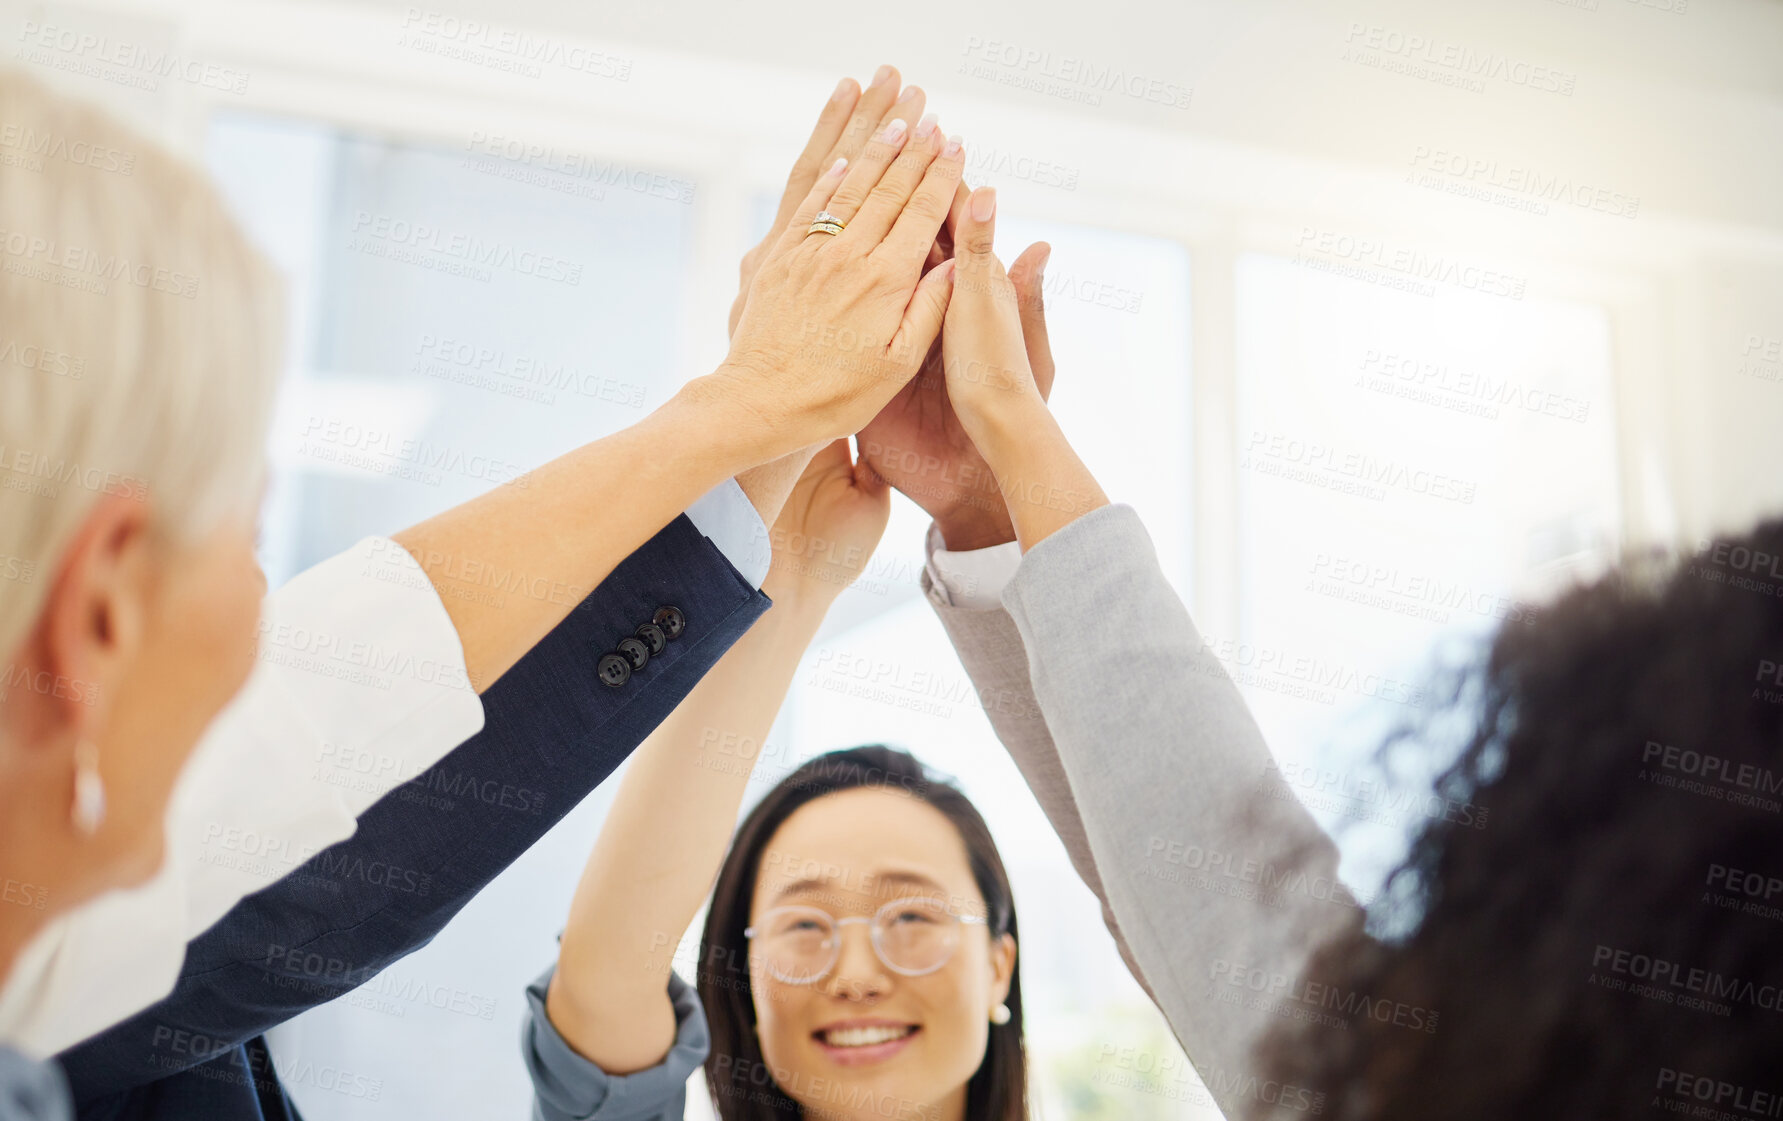 Buy stock photo High five celebration, happy and business people excited for achievement, corporate success or company growth. Team building hands, happiness and professional group celebrate teamwork collaboration